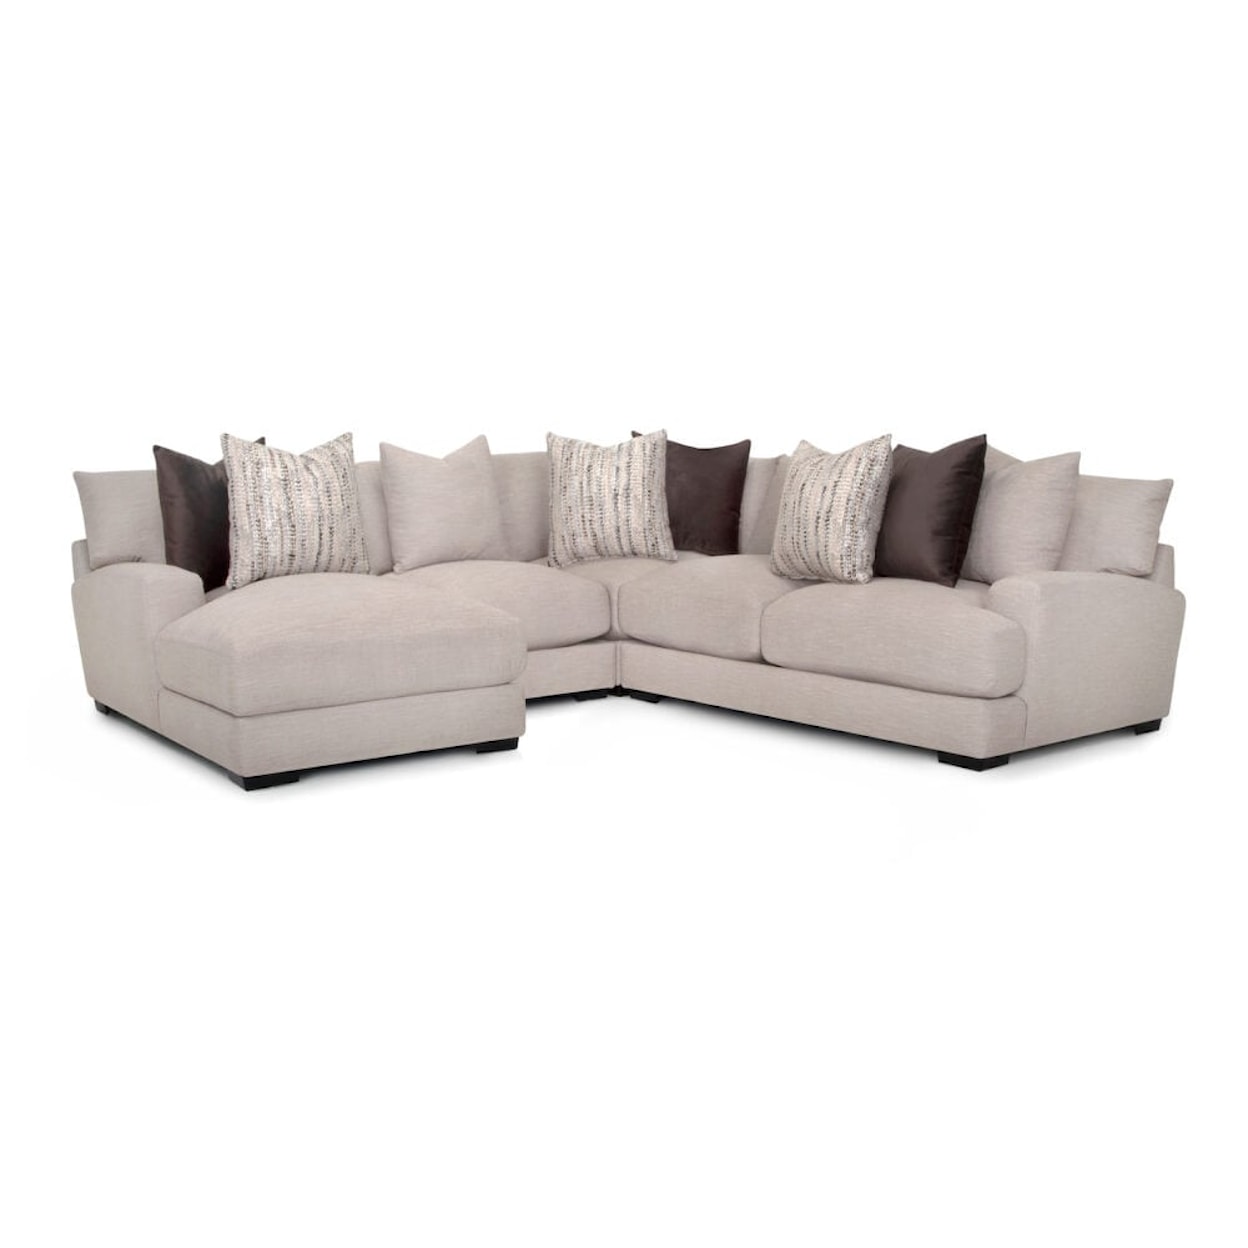 Franklin 808 Hannigan Chaise Sectional Sofa